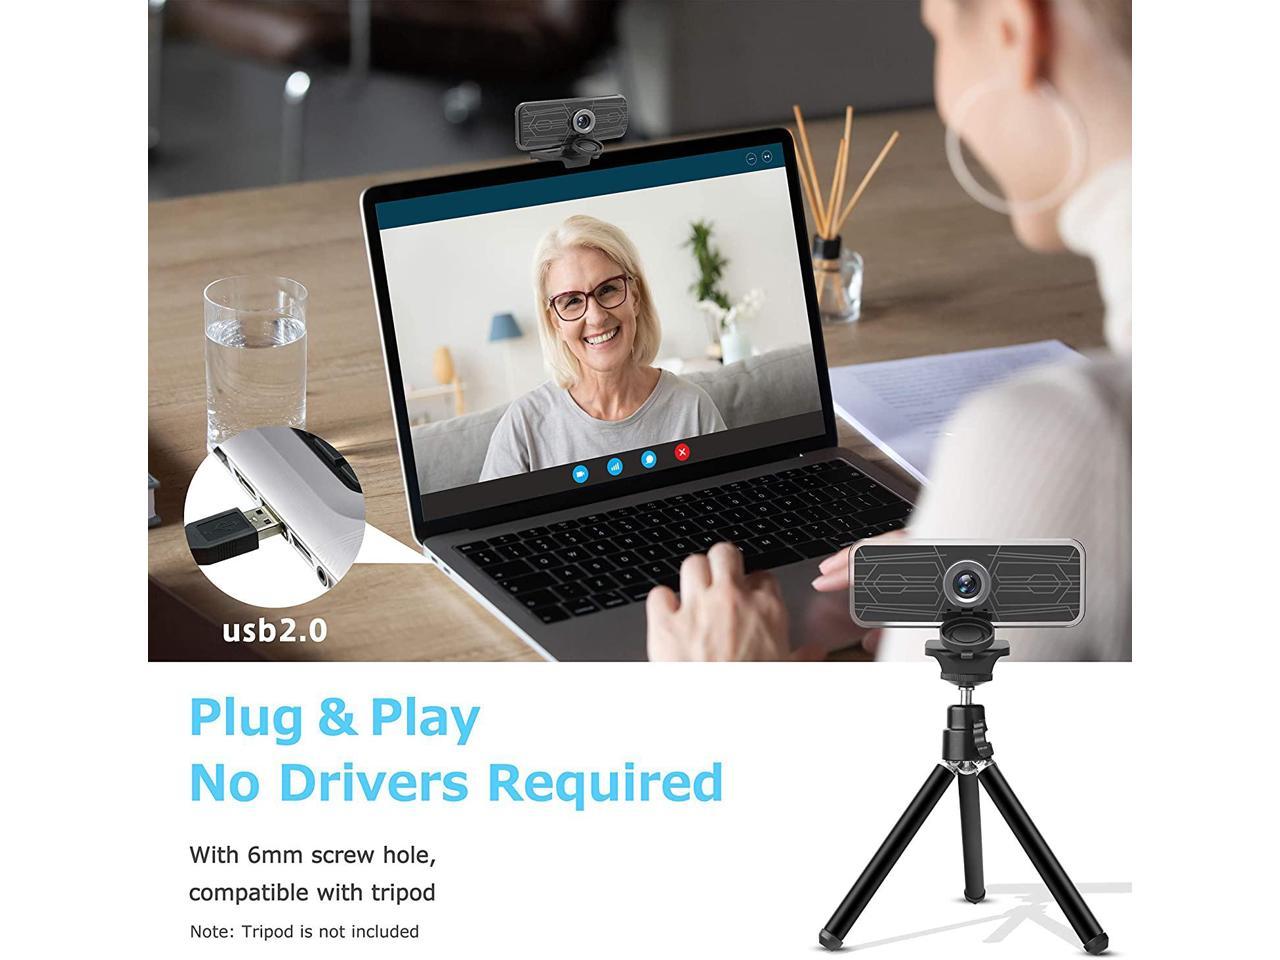 Video Calling Free-Driver Installation Webcam 1080P with Microphone Recording and Streaming Fogeek Full HD Autofocus Web Camera for Conferencing 500M Pixels USB Camera for PC Laptop Desktop 